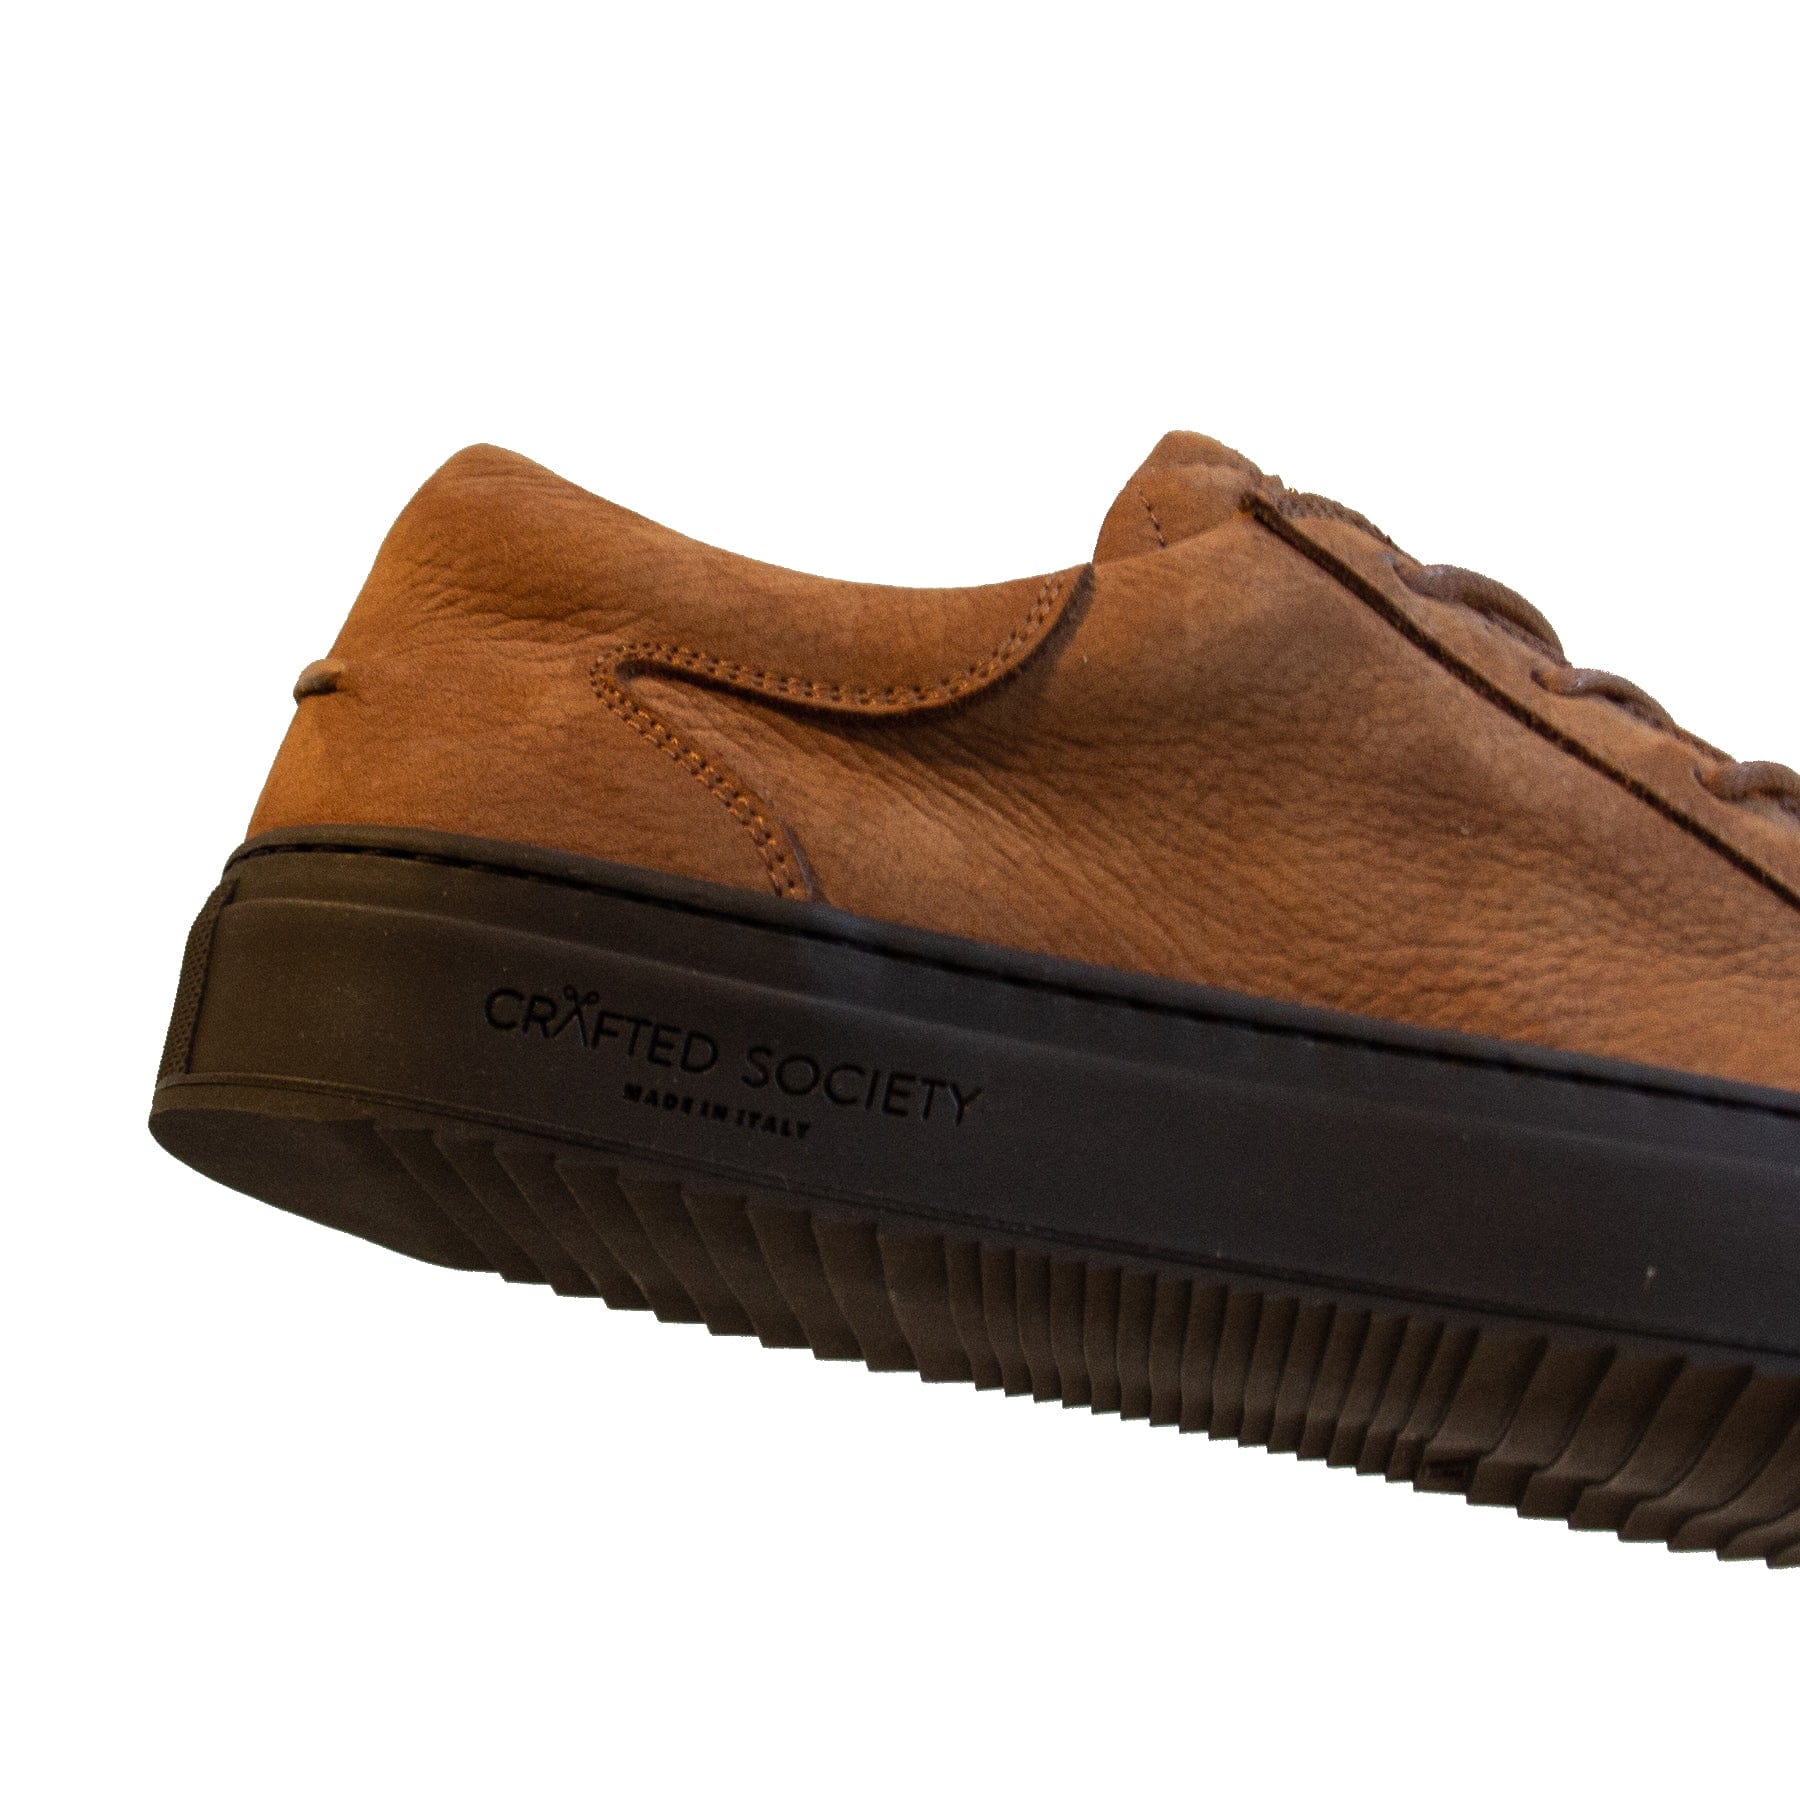 Mario Low Refined Sneaker Cognac Nubuck Chocolate Outsole Sideview Logodetail